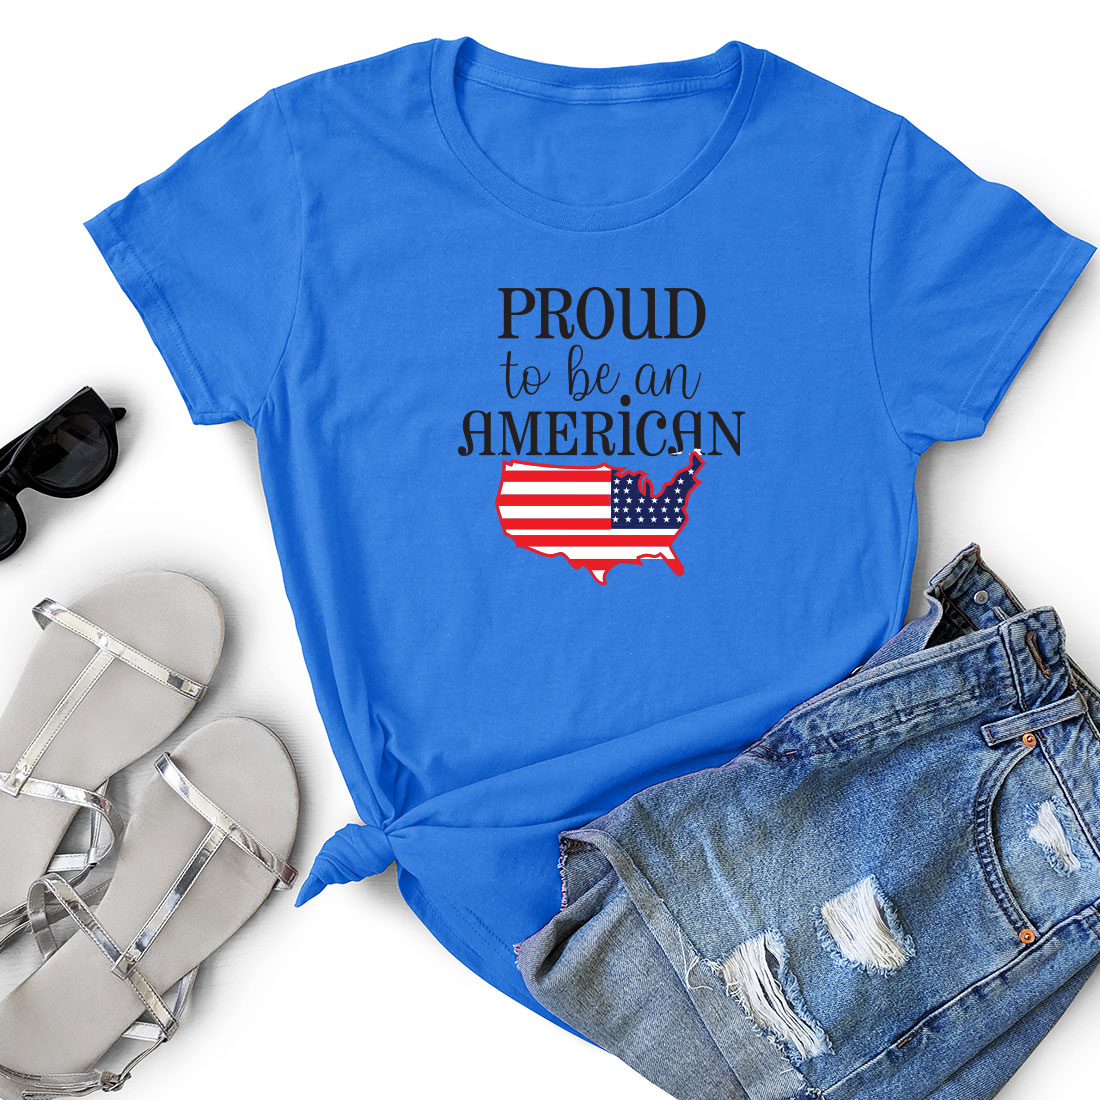 T - shirt that says proud to be an american.